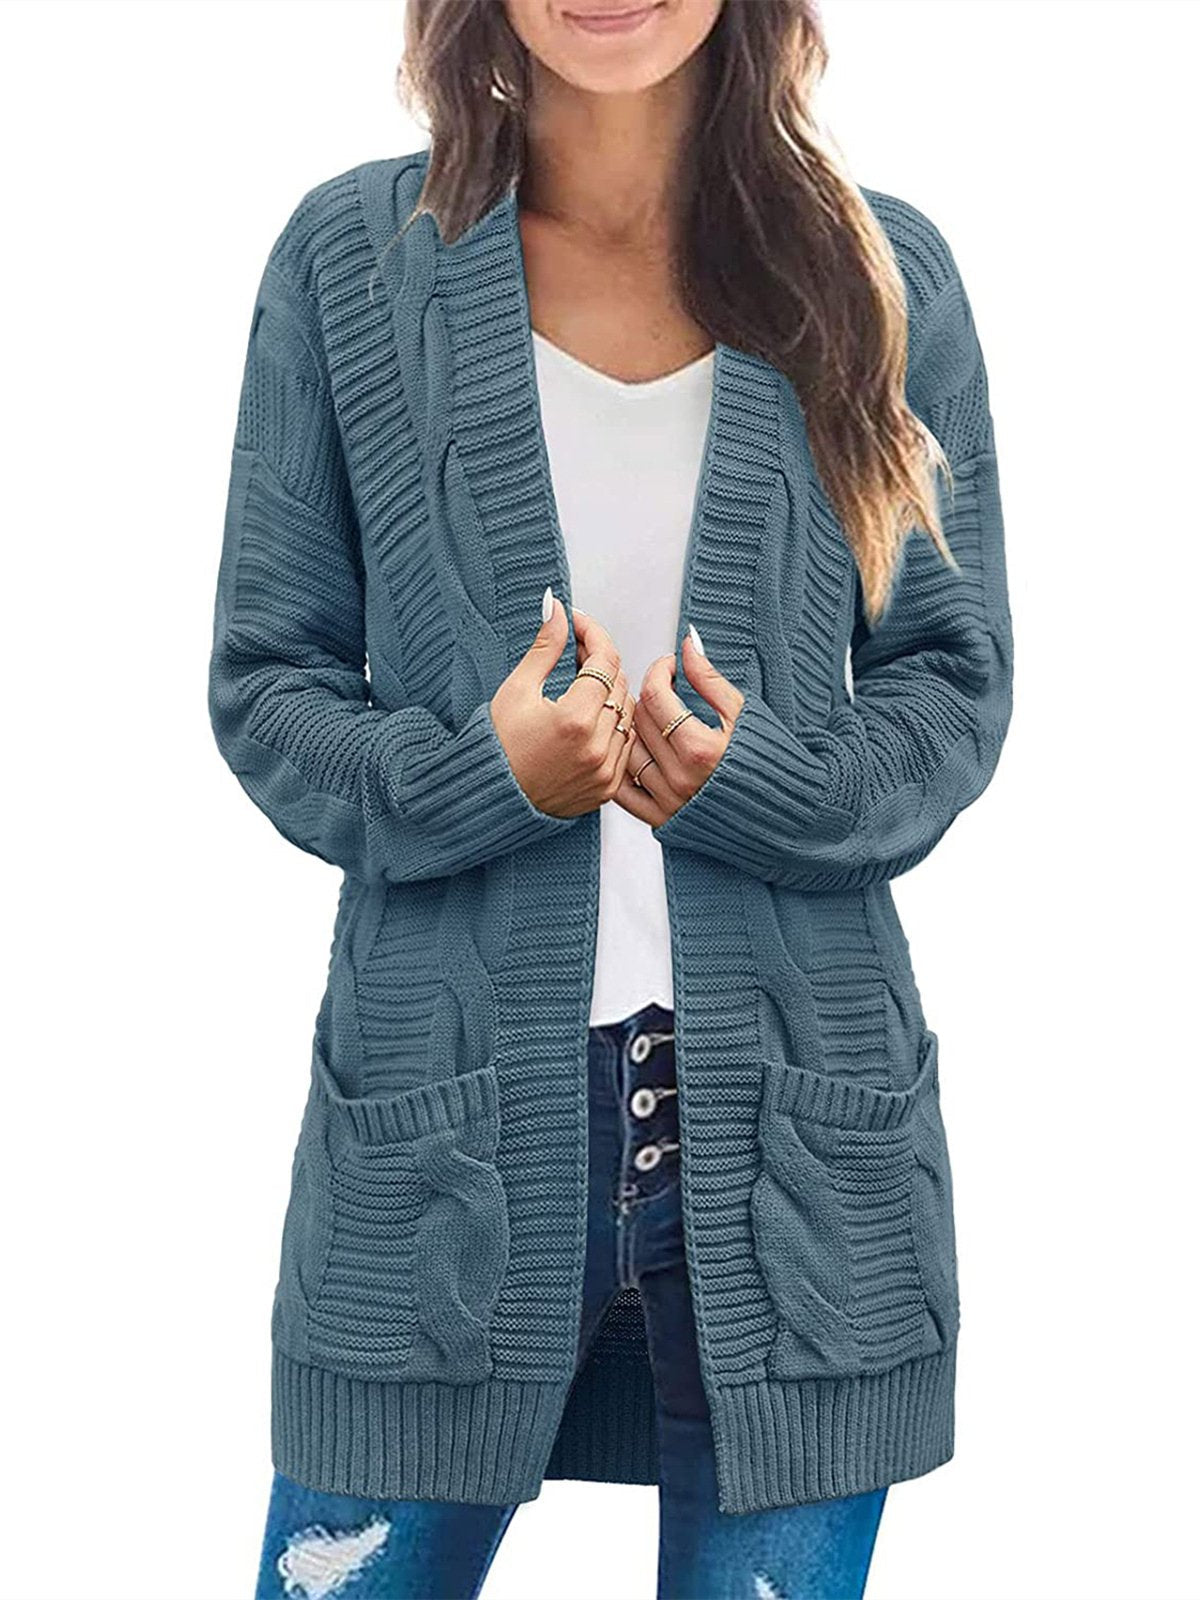 2022 Women's Long Sleeve Cable Knit Cardigan Sweaters